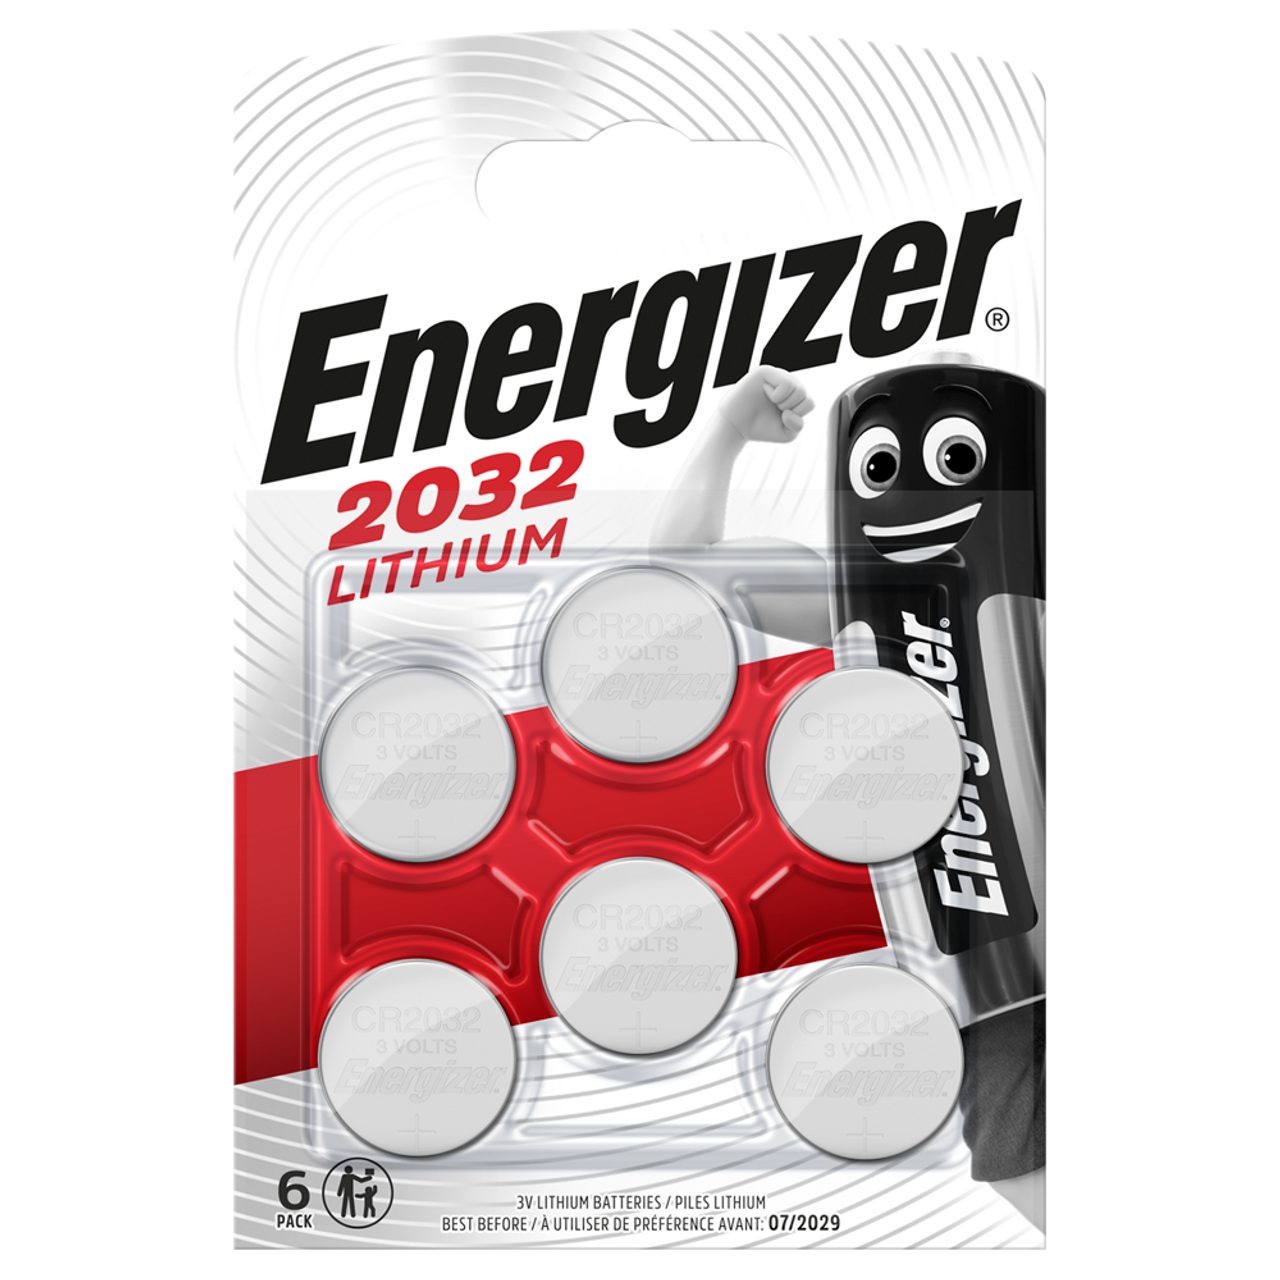 Energizer CR2032 Coin Cell Battery (6 Pack)